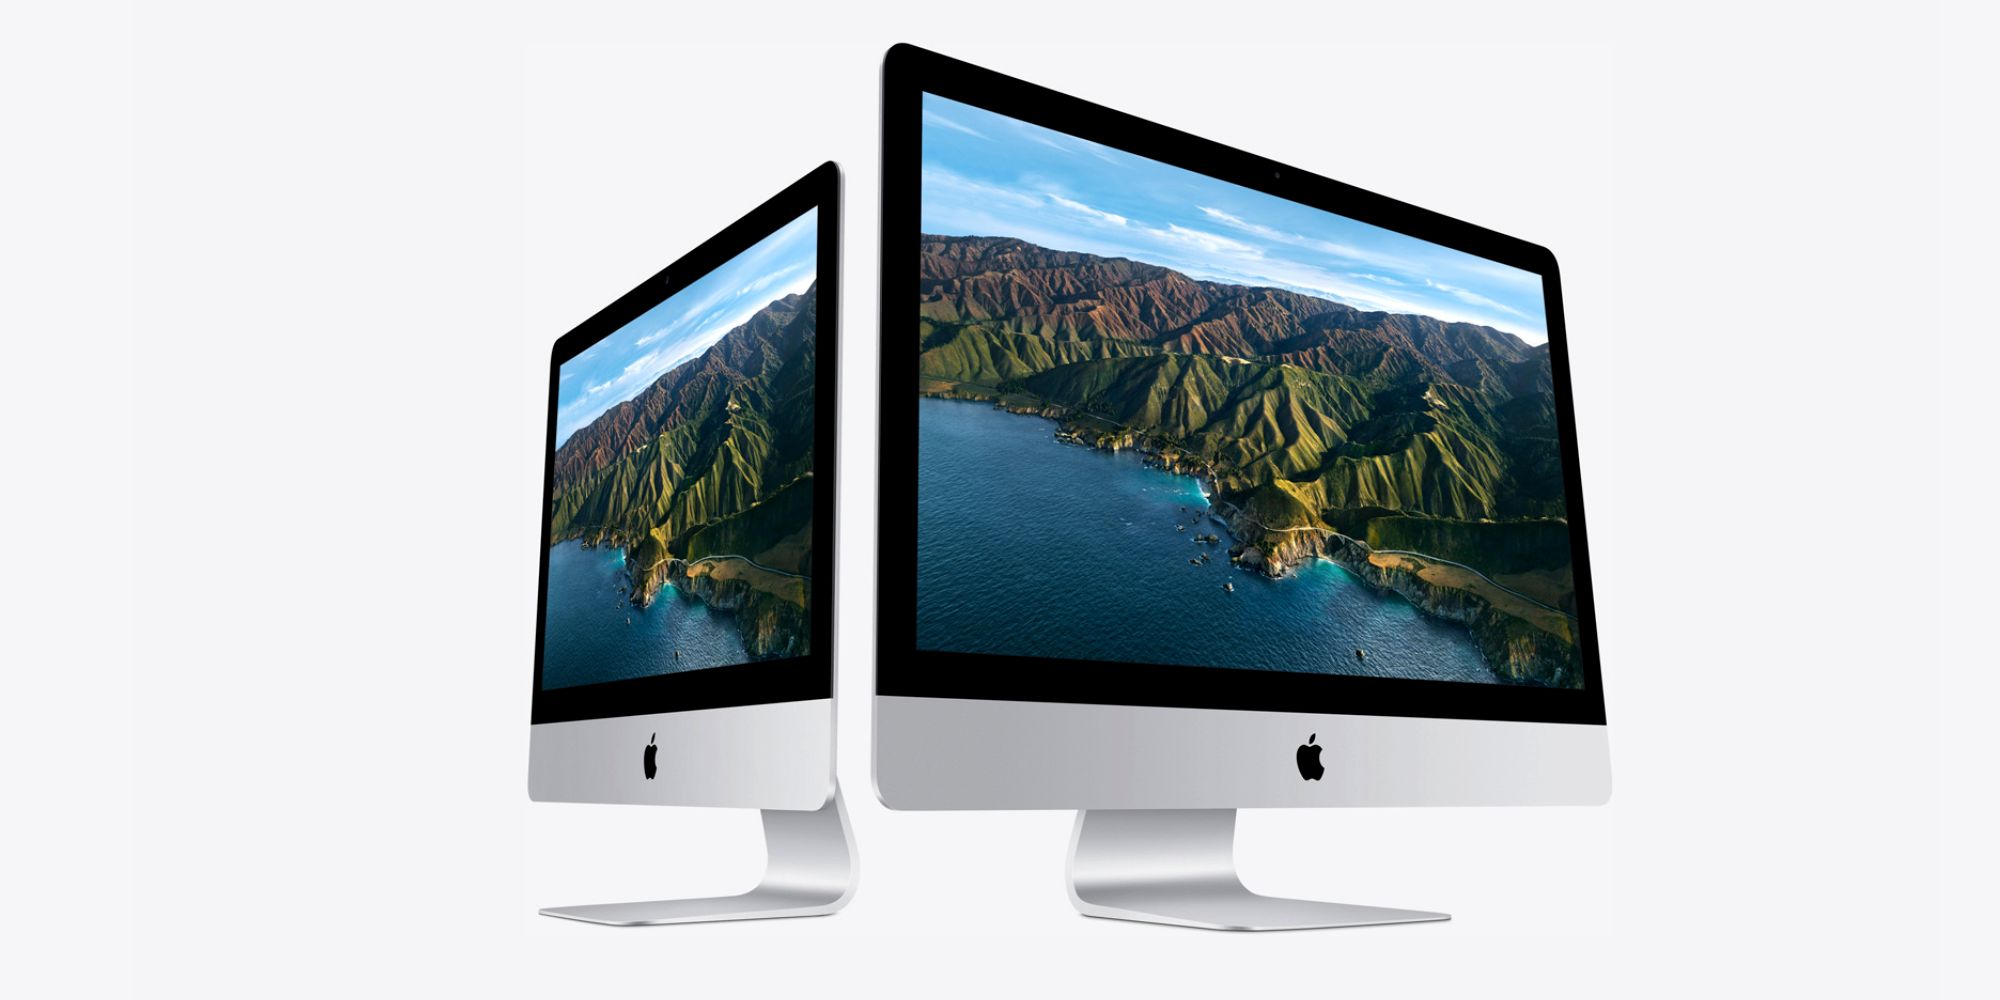 How To Reset An Old iMac Before Your New M1 iMac Arrives